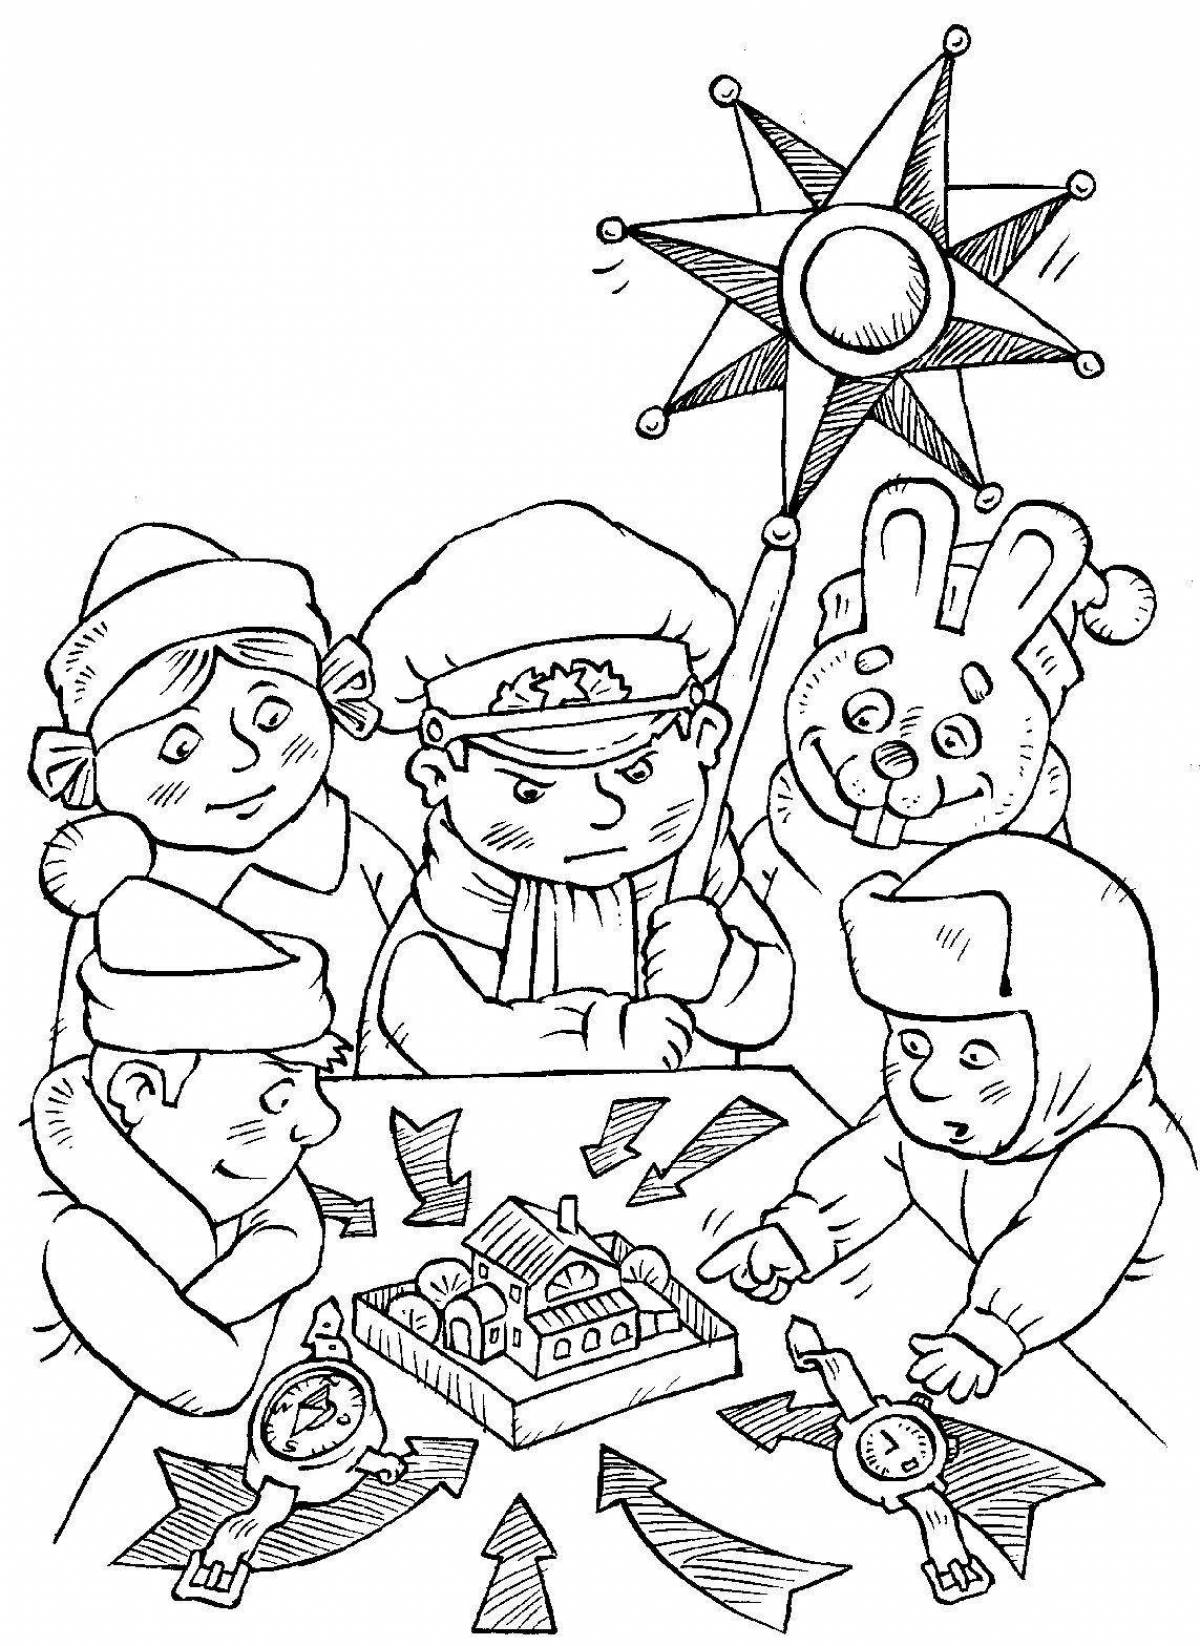 Colorful carol coloring book for children 6-7 years old